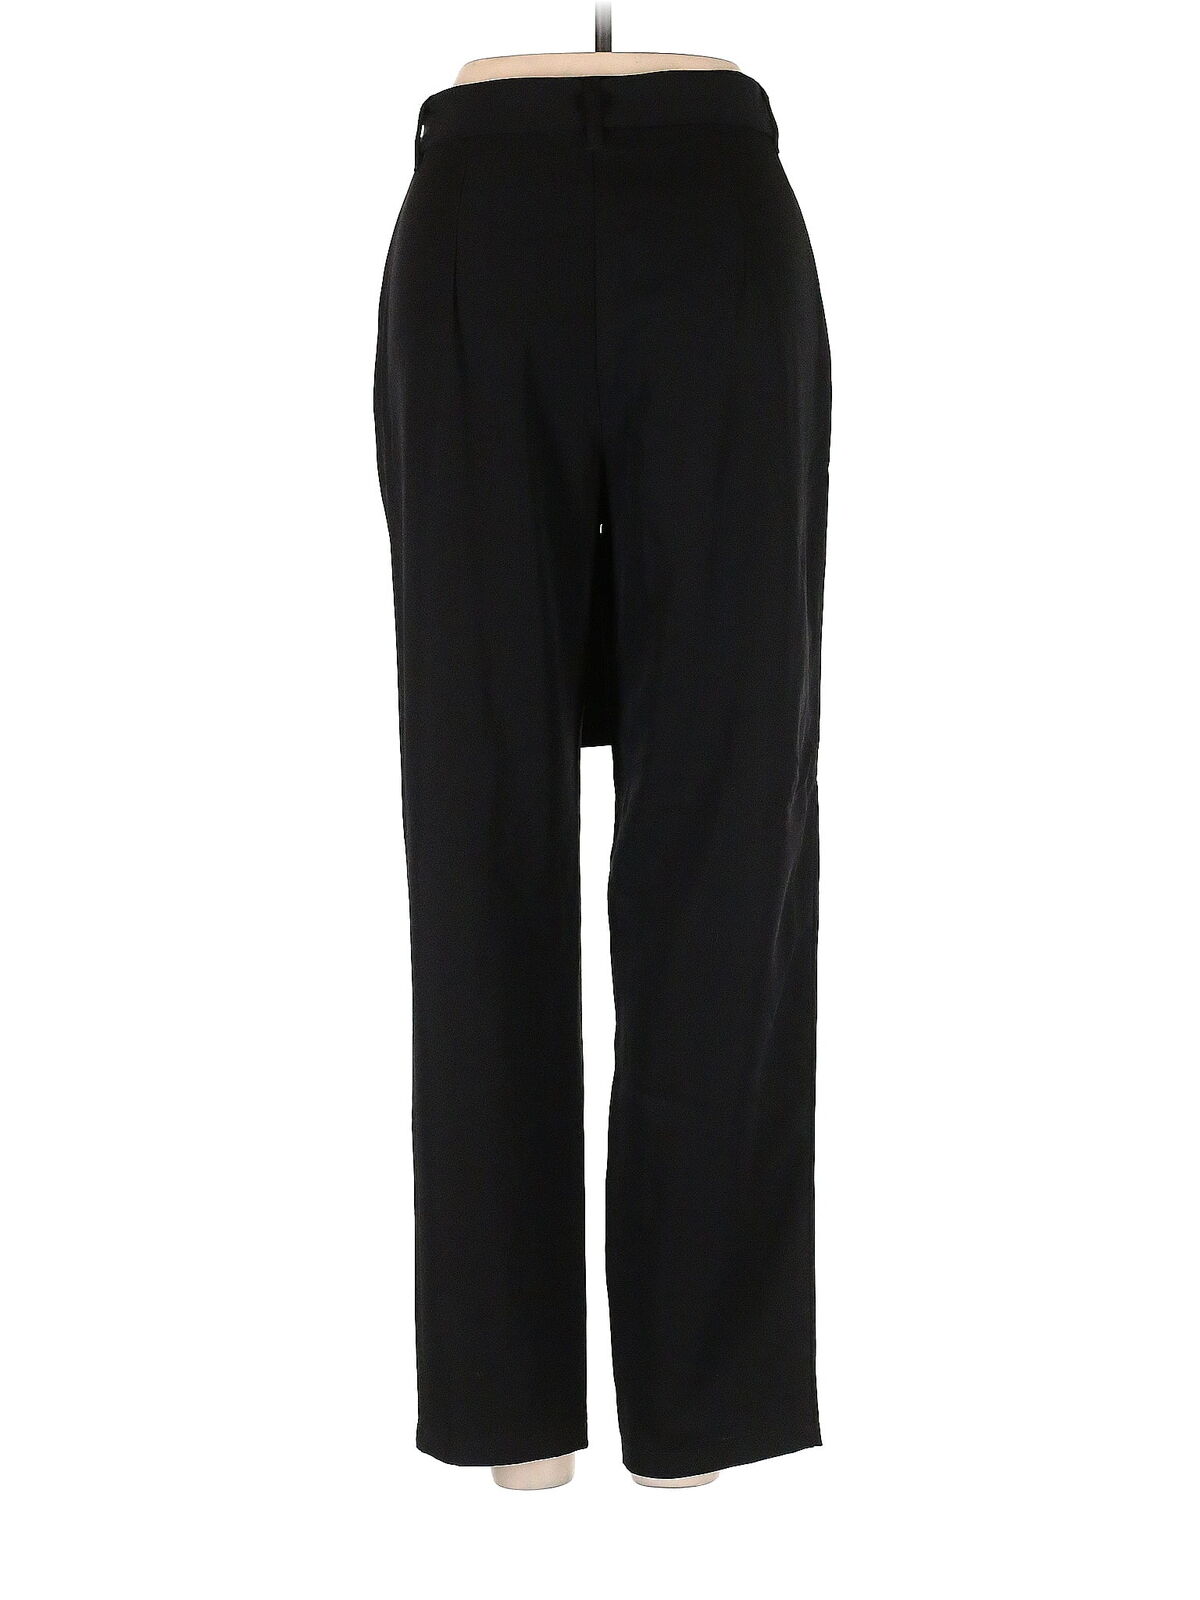 Forever 21 Women Black Casual Pants S - image 2